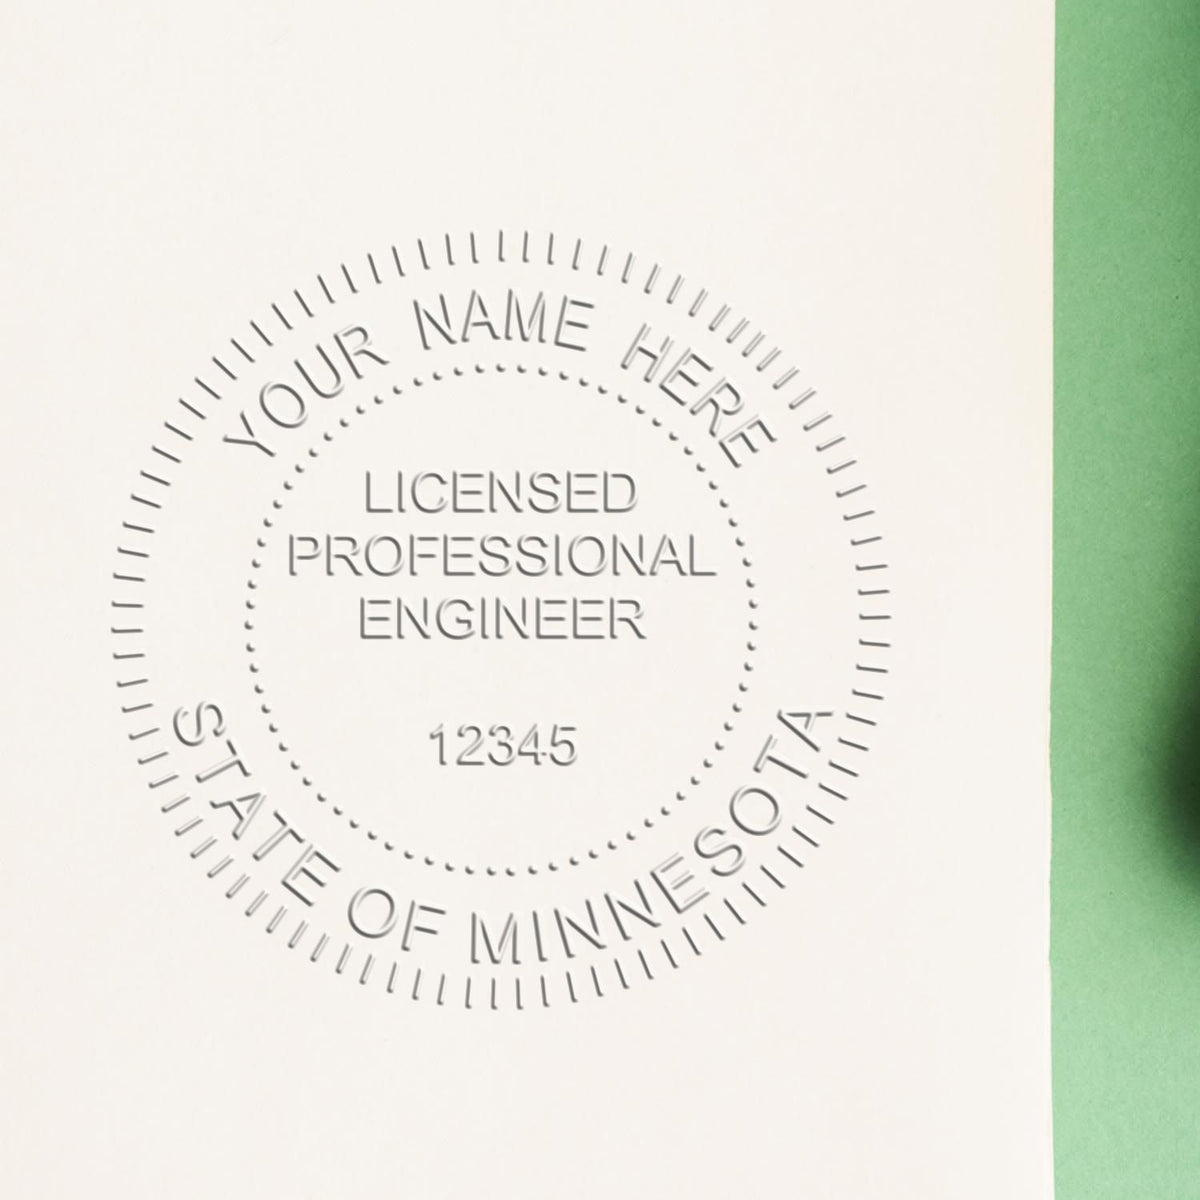 The Heavy Duty Cast Iron Minnesota Engineer Seal Embosser stamp impression comes to life with a crisp, detailed photo on paper - showcasing true professional quality.